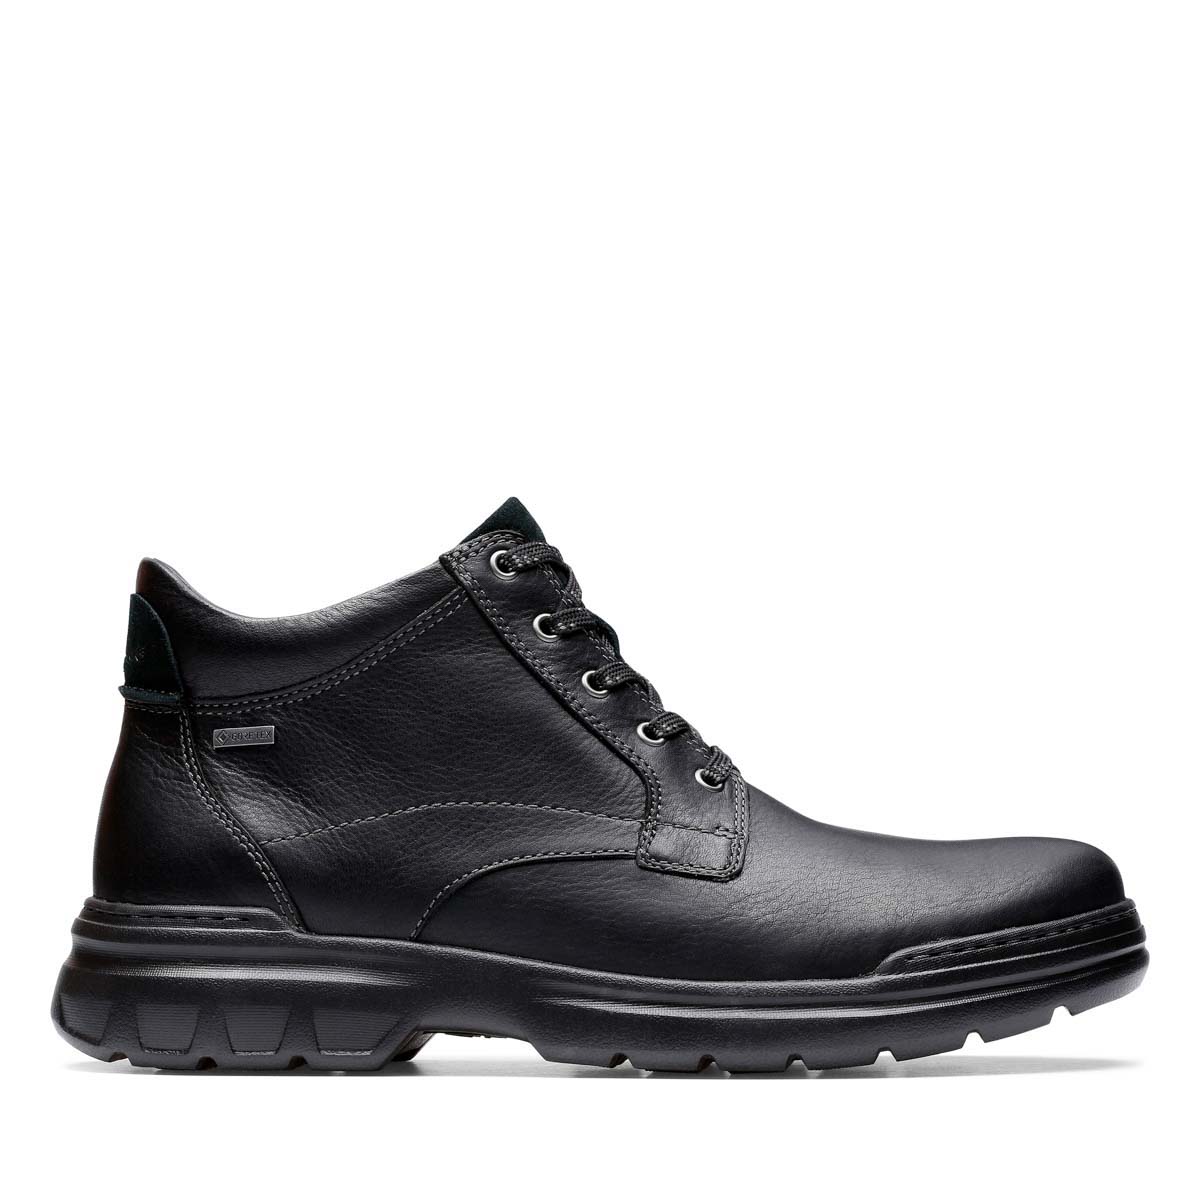 Clarks Rockie 2 Up Gtx H Fit Black leather boots